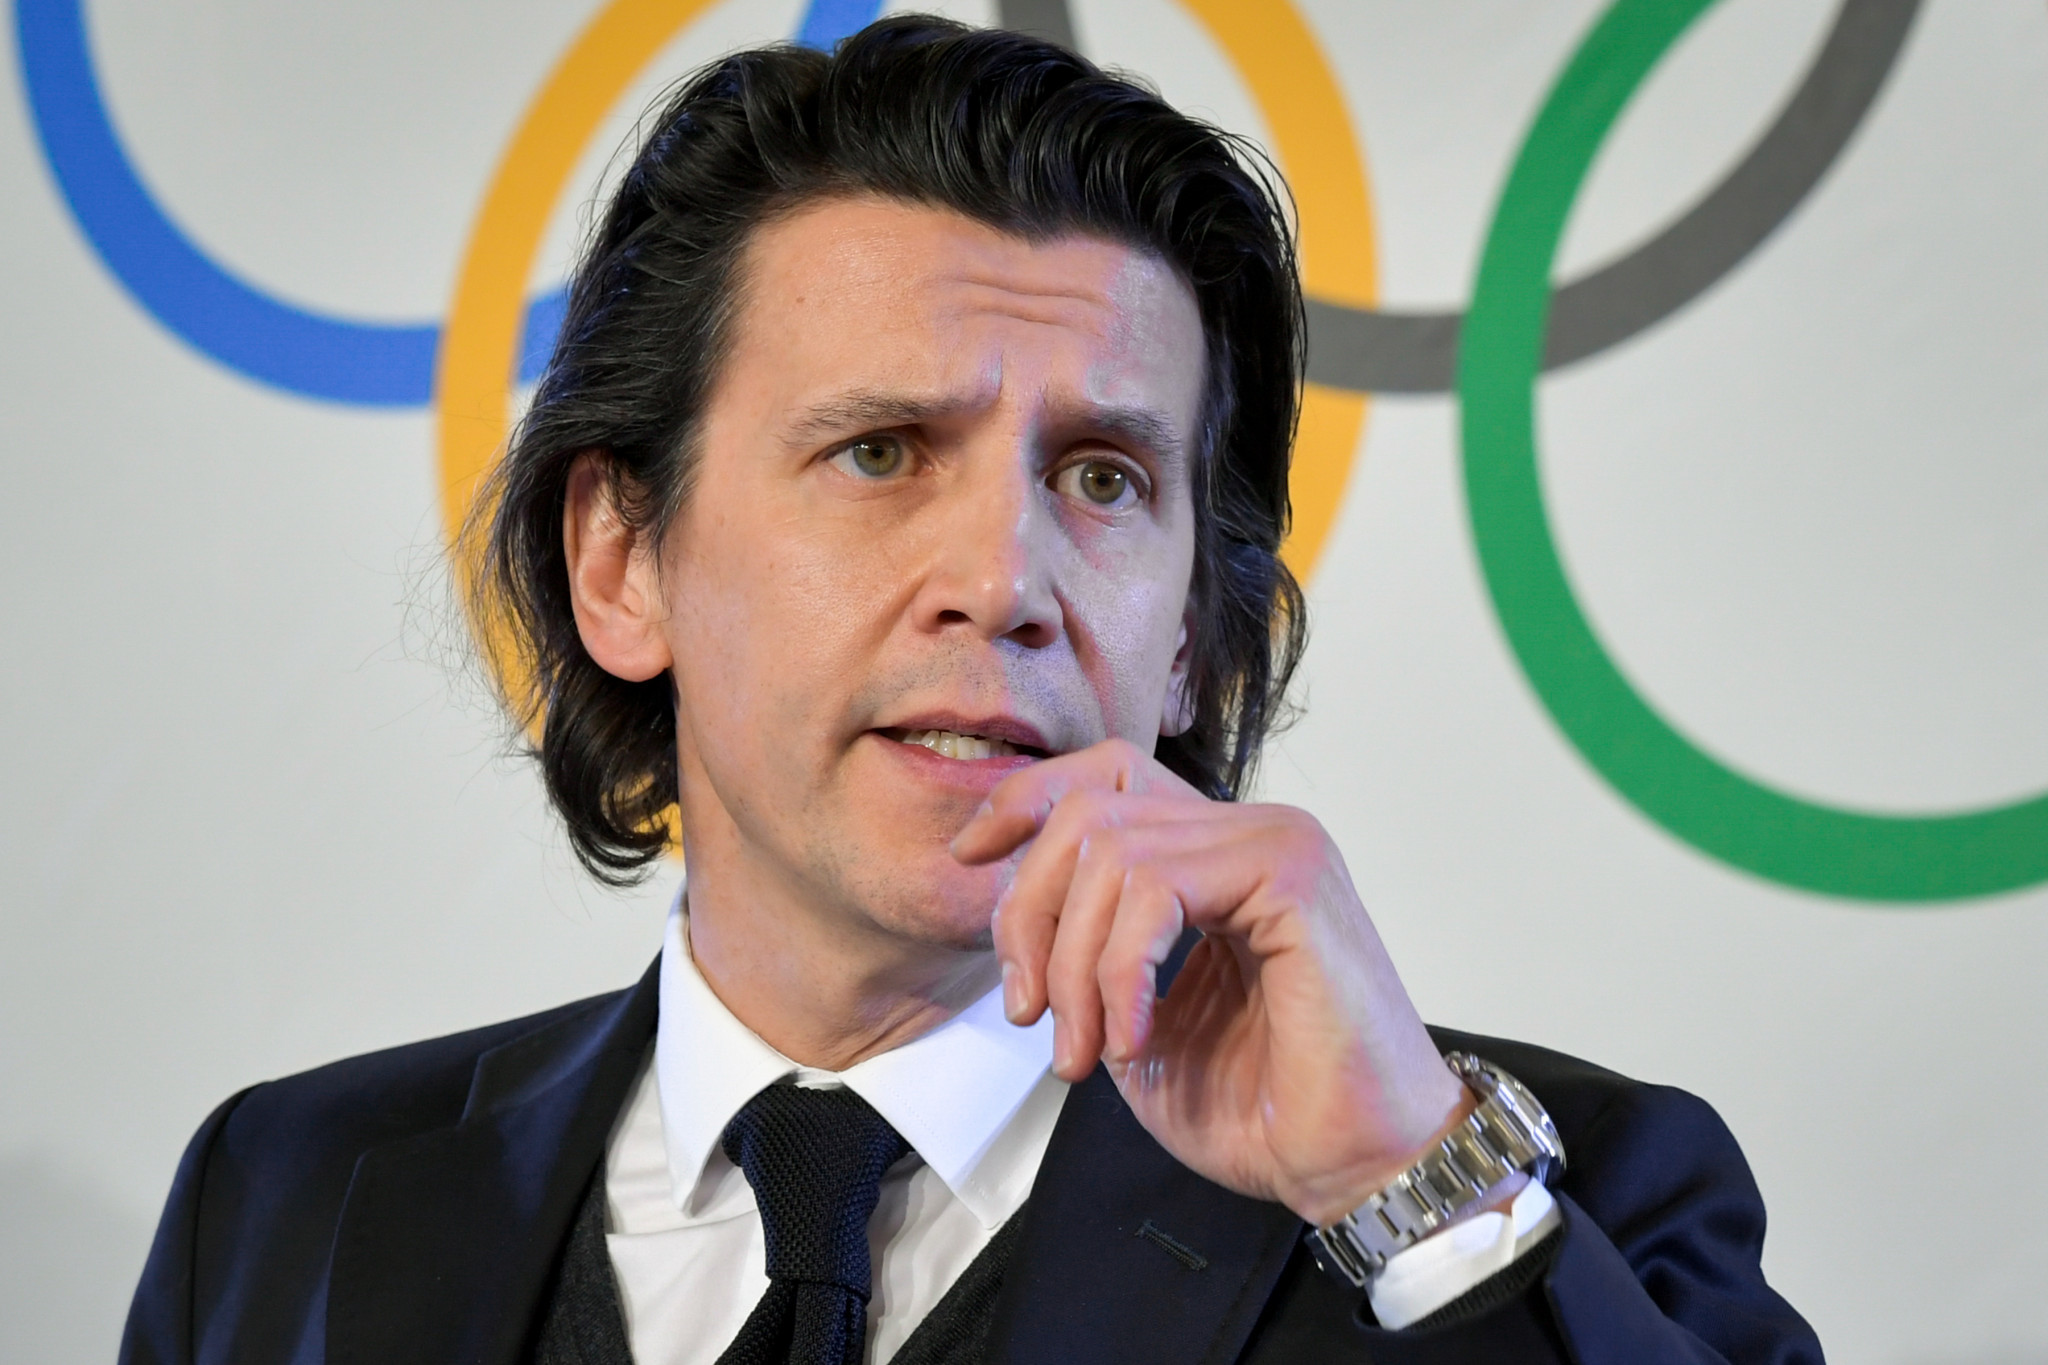 Christophe Dubi, the IOC's executive director for the Olympic Games, spoke via a video link as part of the Executive Learning Pathway ©Getty Images